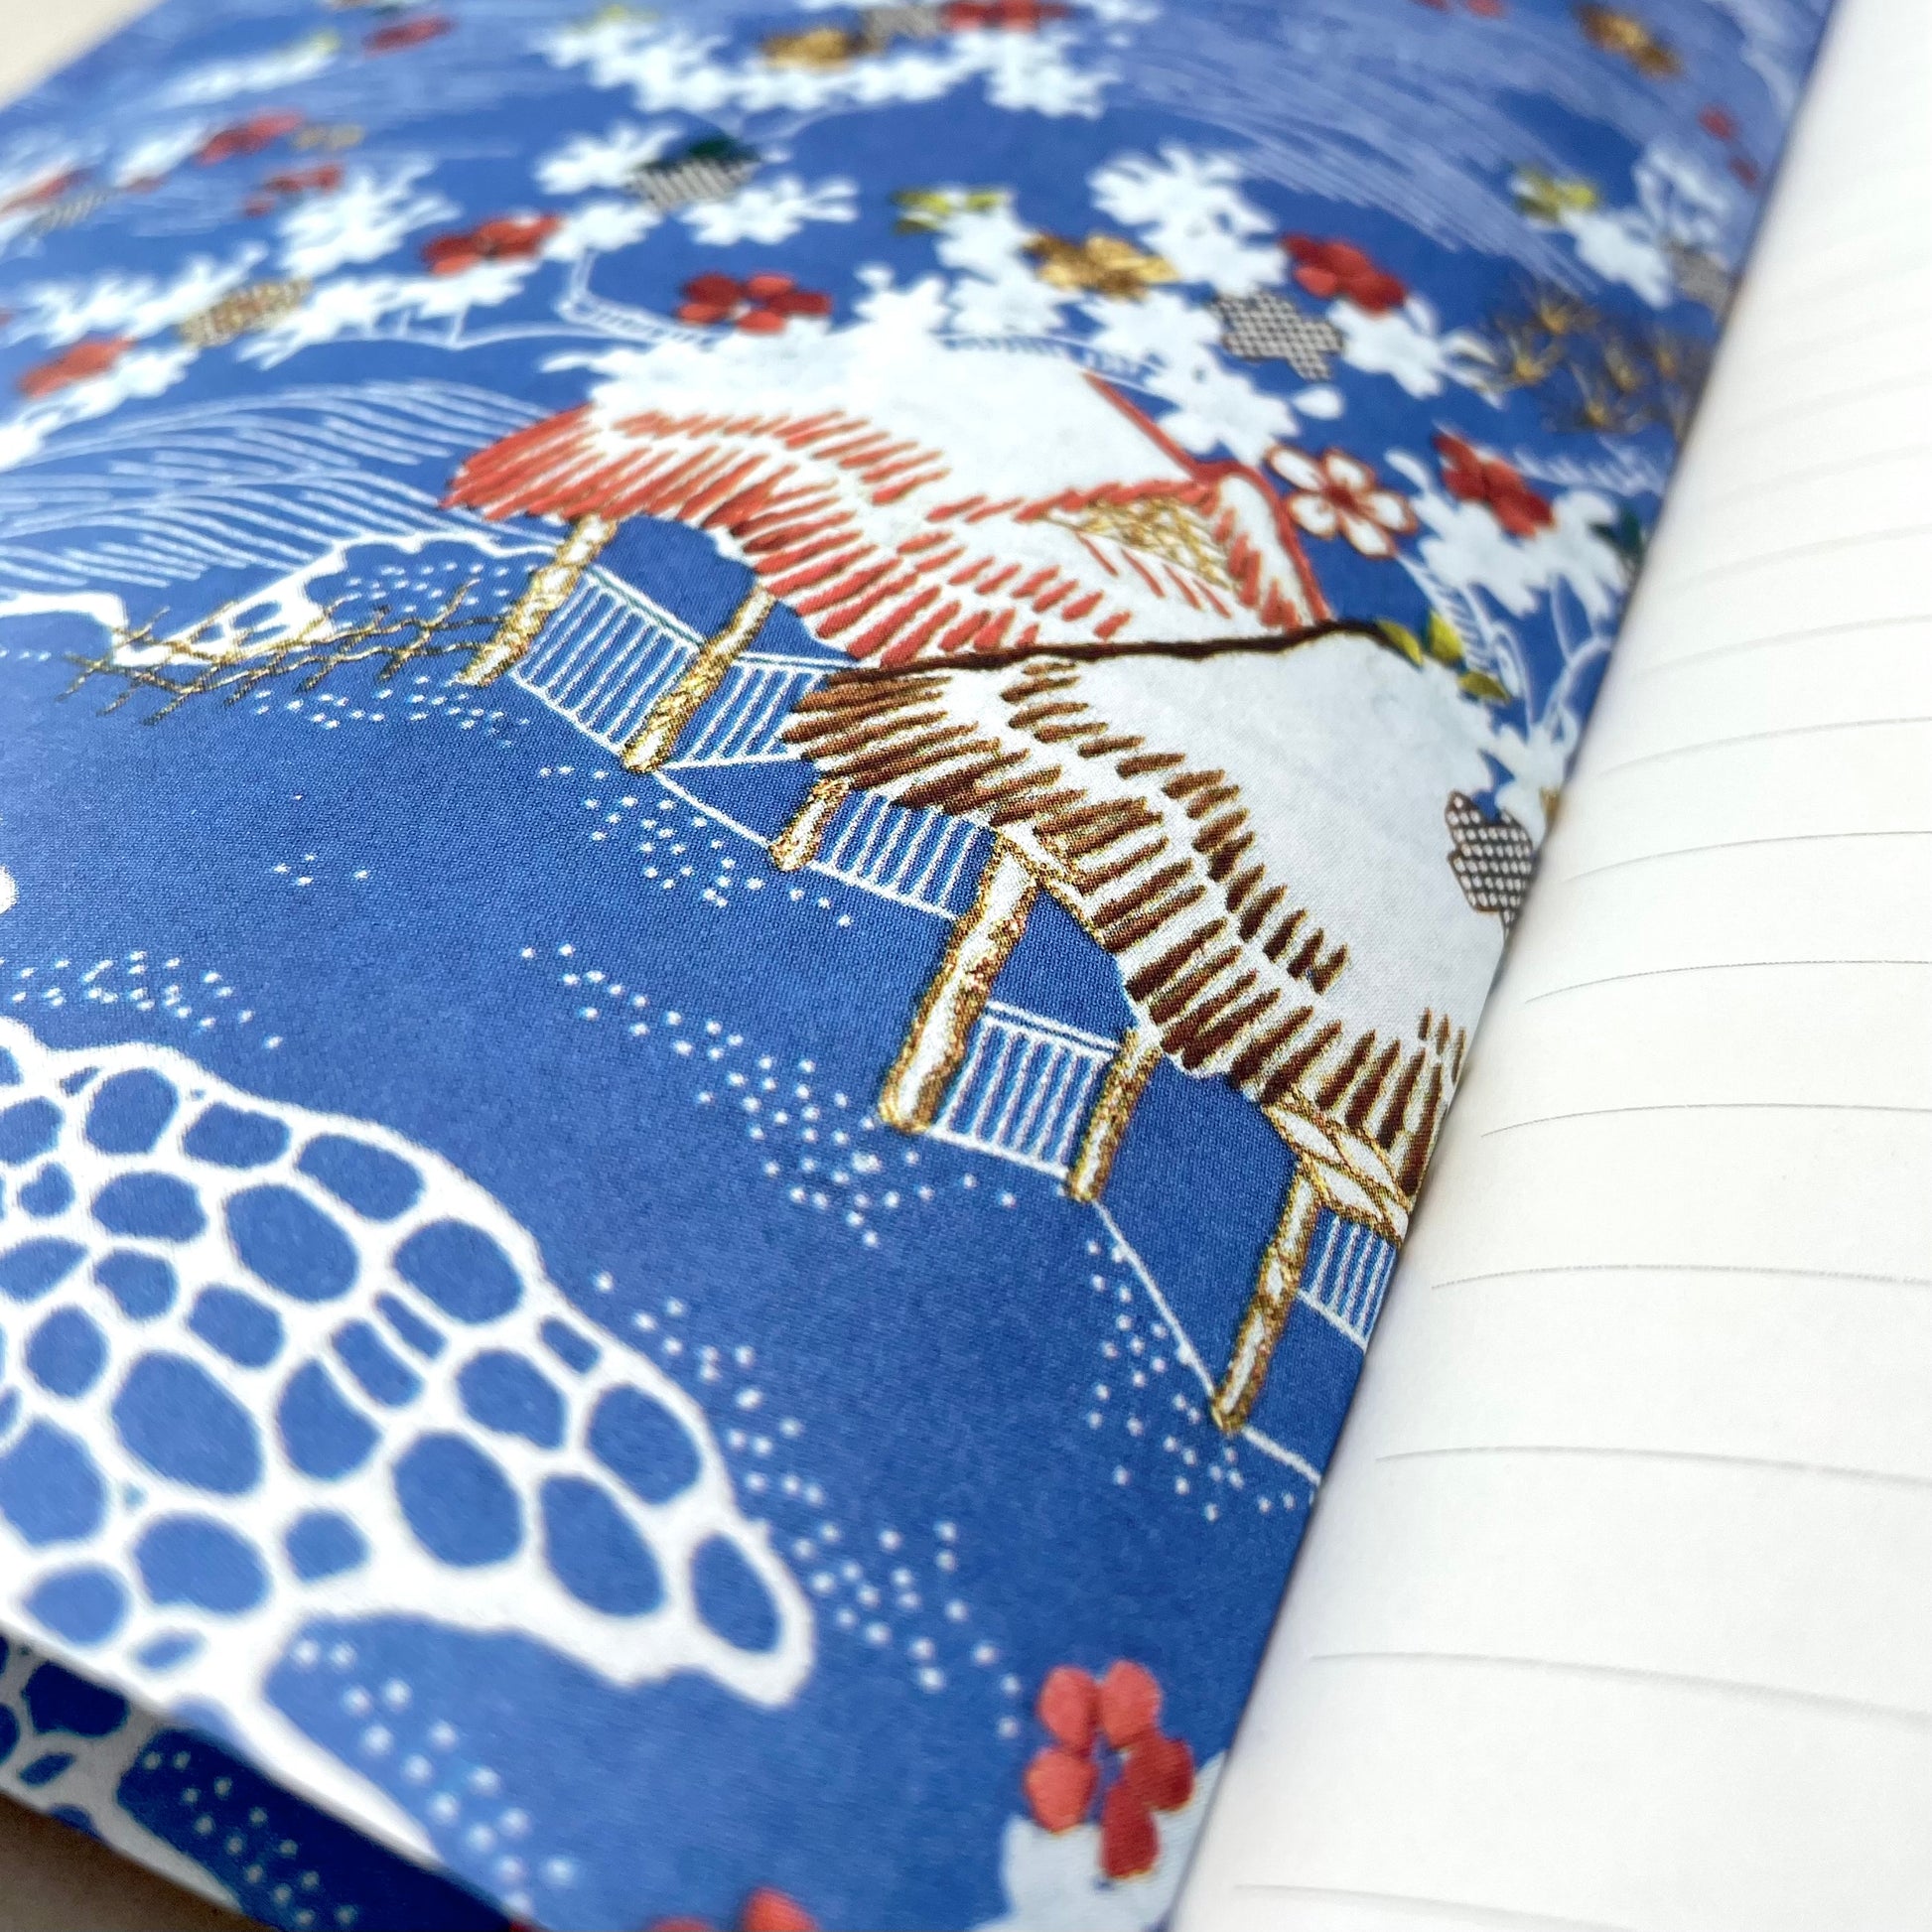 A5 lined notebook with a japanese cover design with white swans on an orange background, close up of the blue endpaper